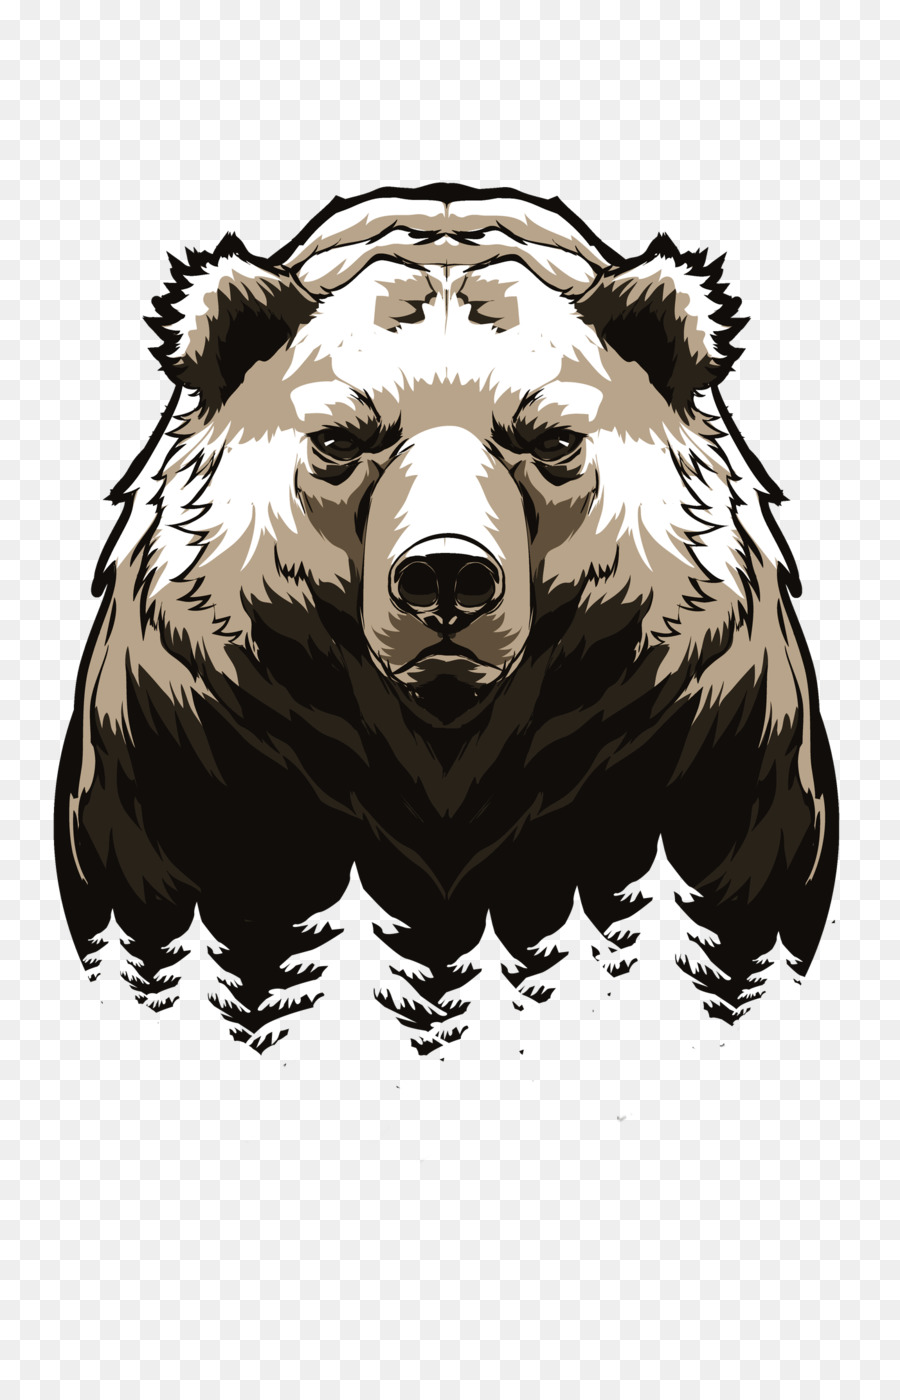 American black bear Grizzly bear Vector graphics Giant panda - bear png download - 1400*2156 - Free Transparent Bear png Download.